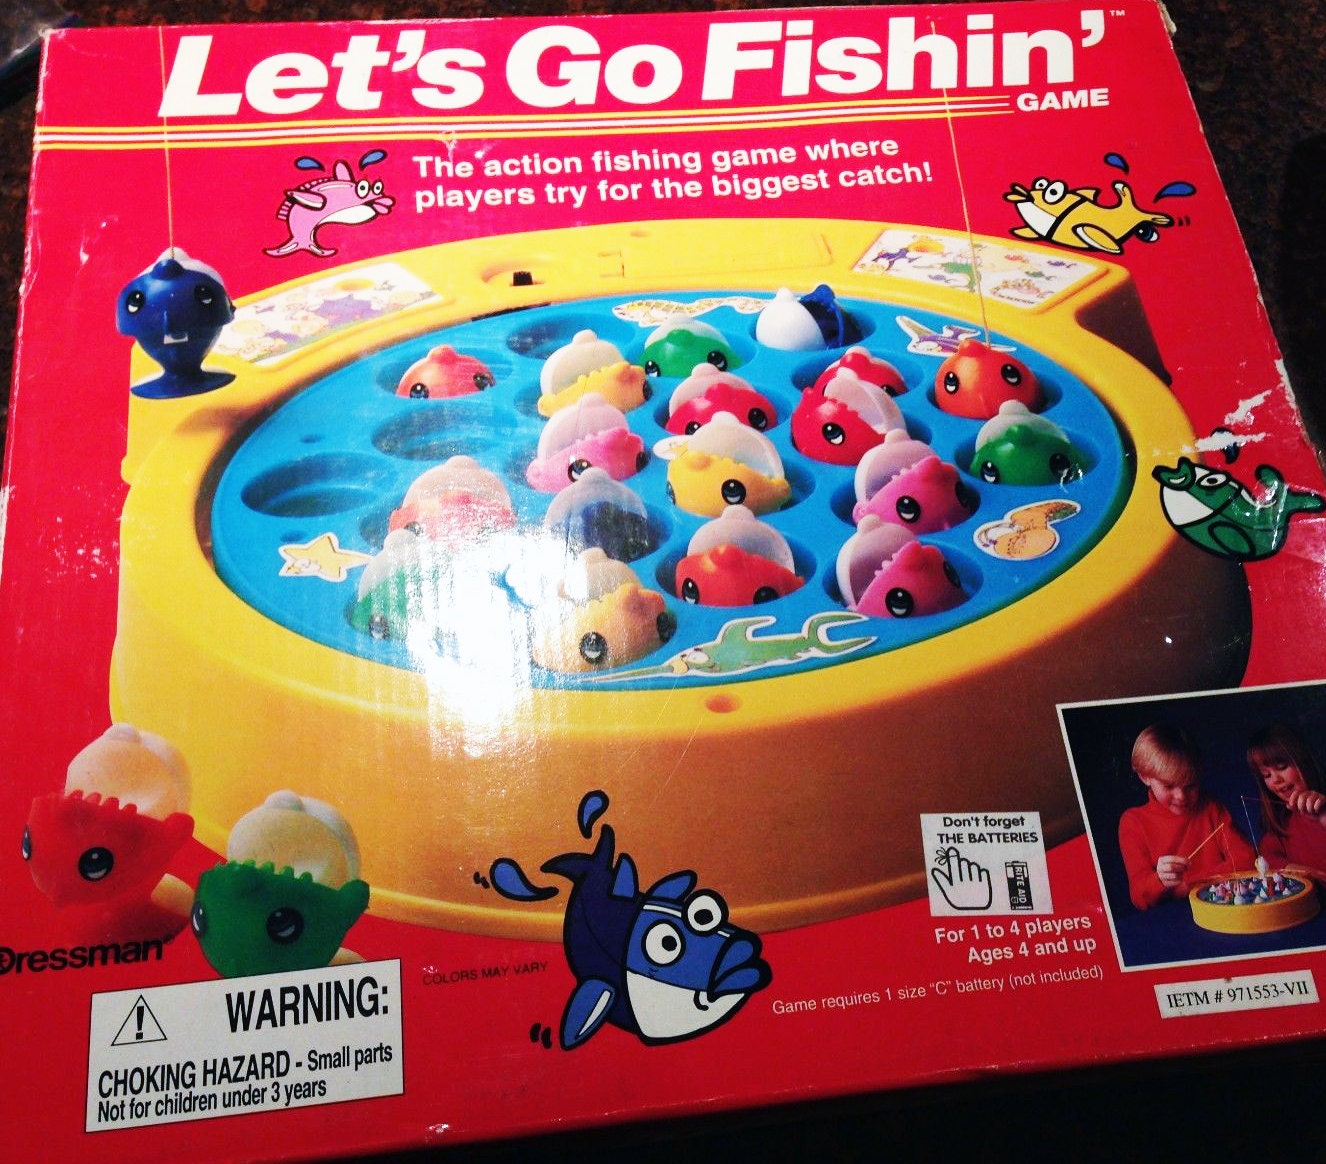 Pressman Toys, Toys, Fishing Game Vtg Lets Go Fishin Fun Fast Action Game  With Deluxe Motorized Base